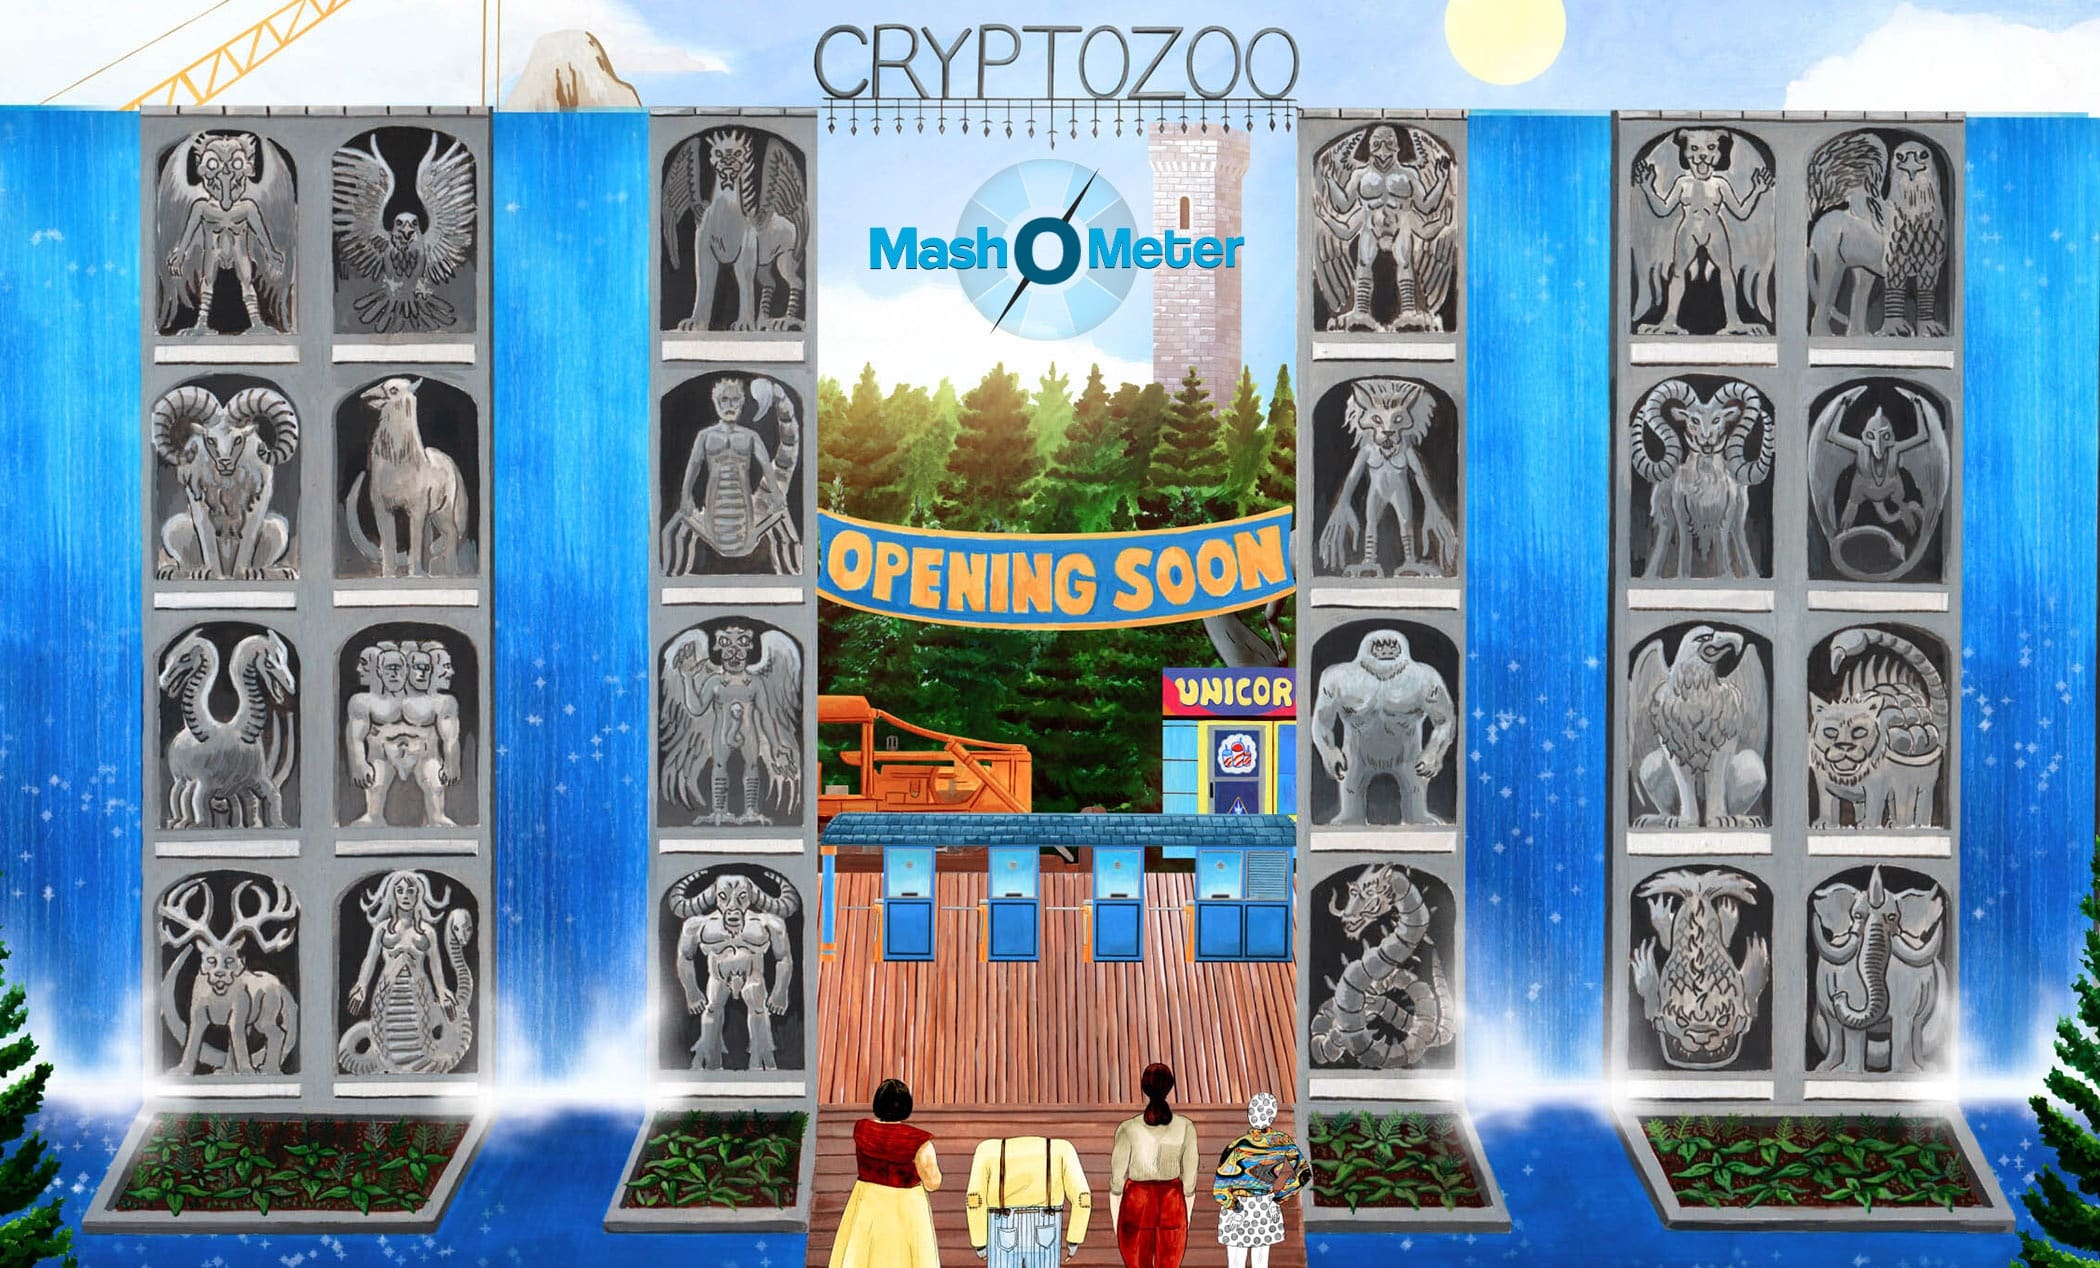 At the cryptozoo